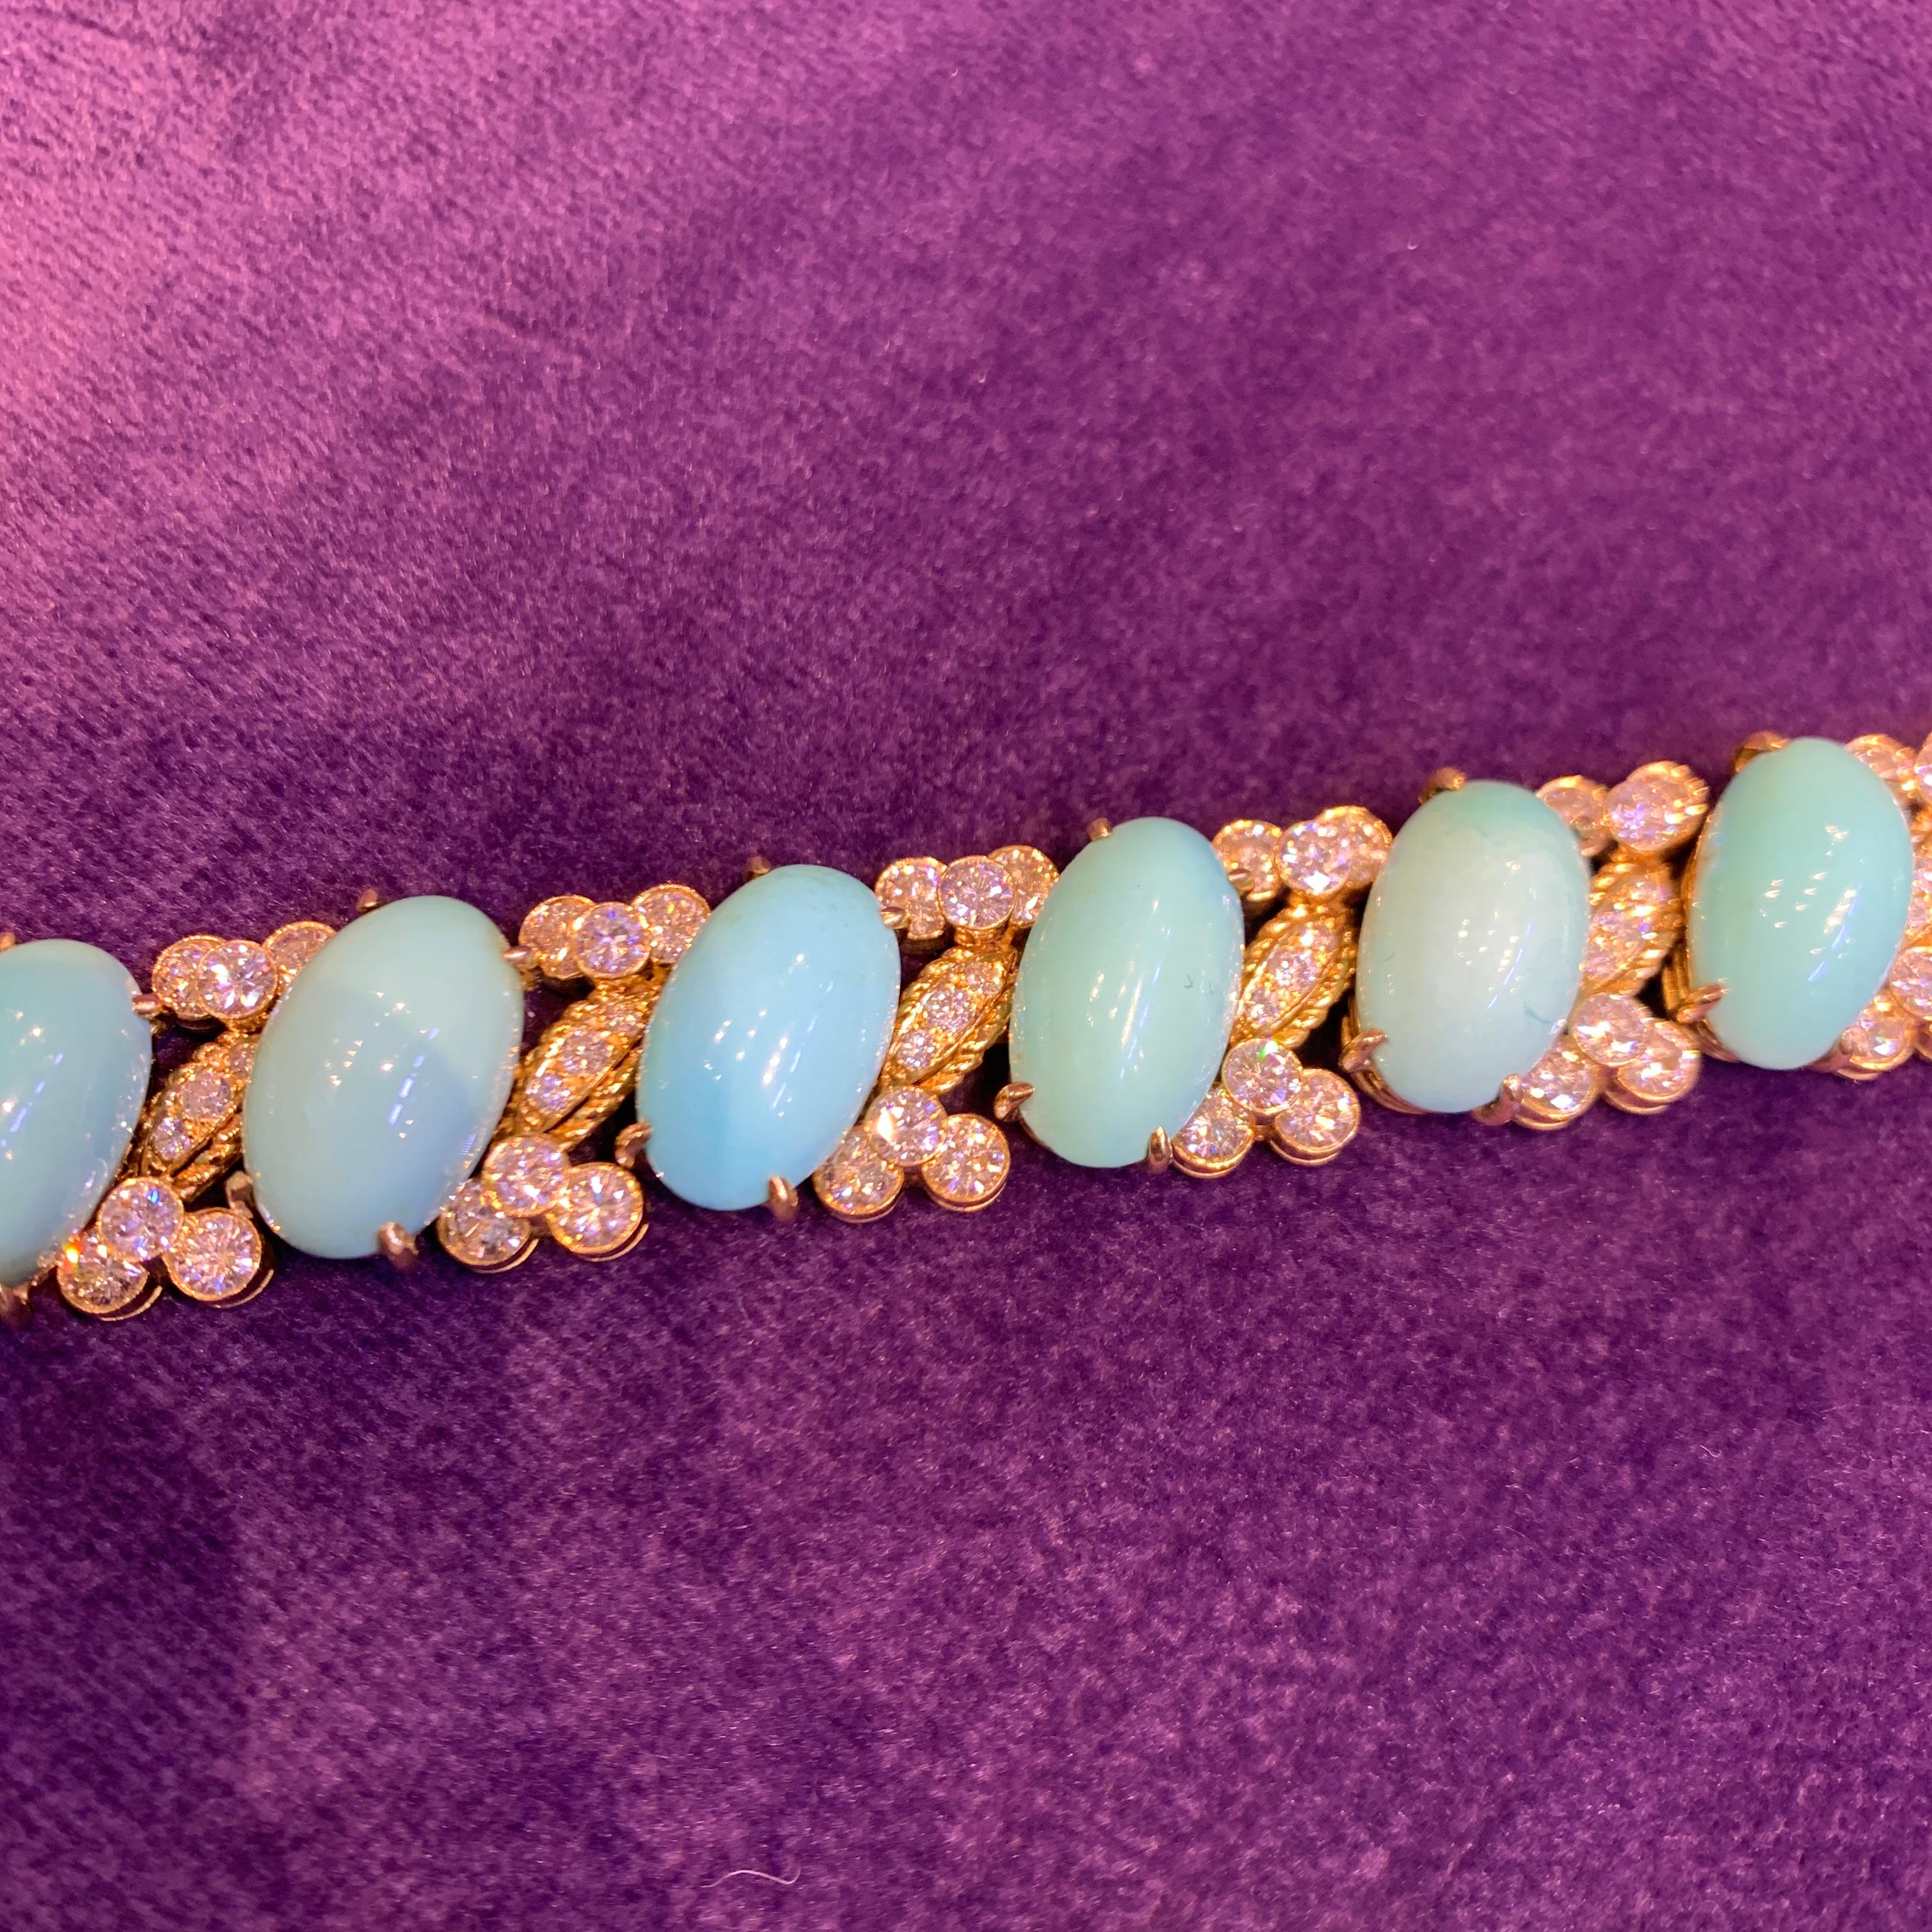 Van Cleef & Arpels Turquoise & Diamond Bracelet In Excellent Condition For Sale In New York, NY